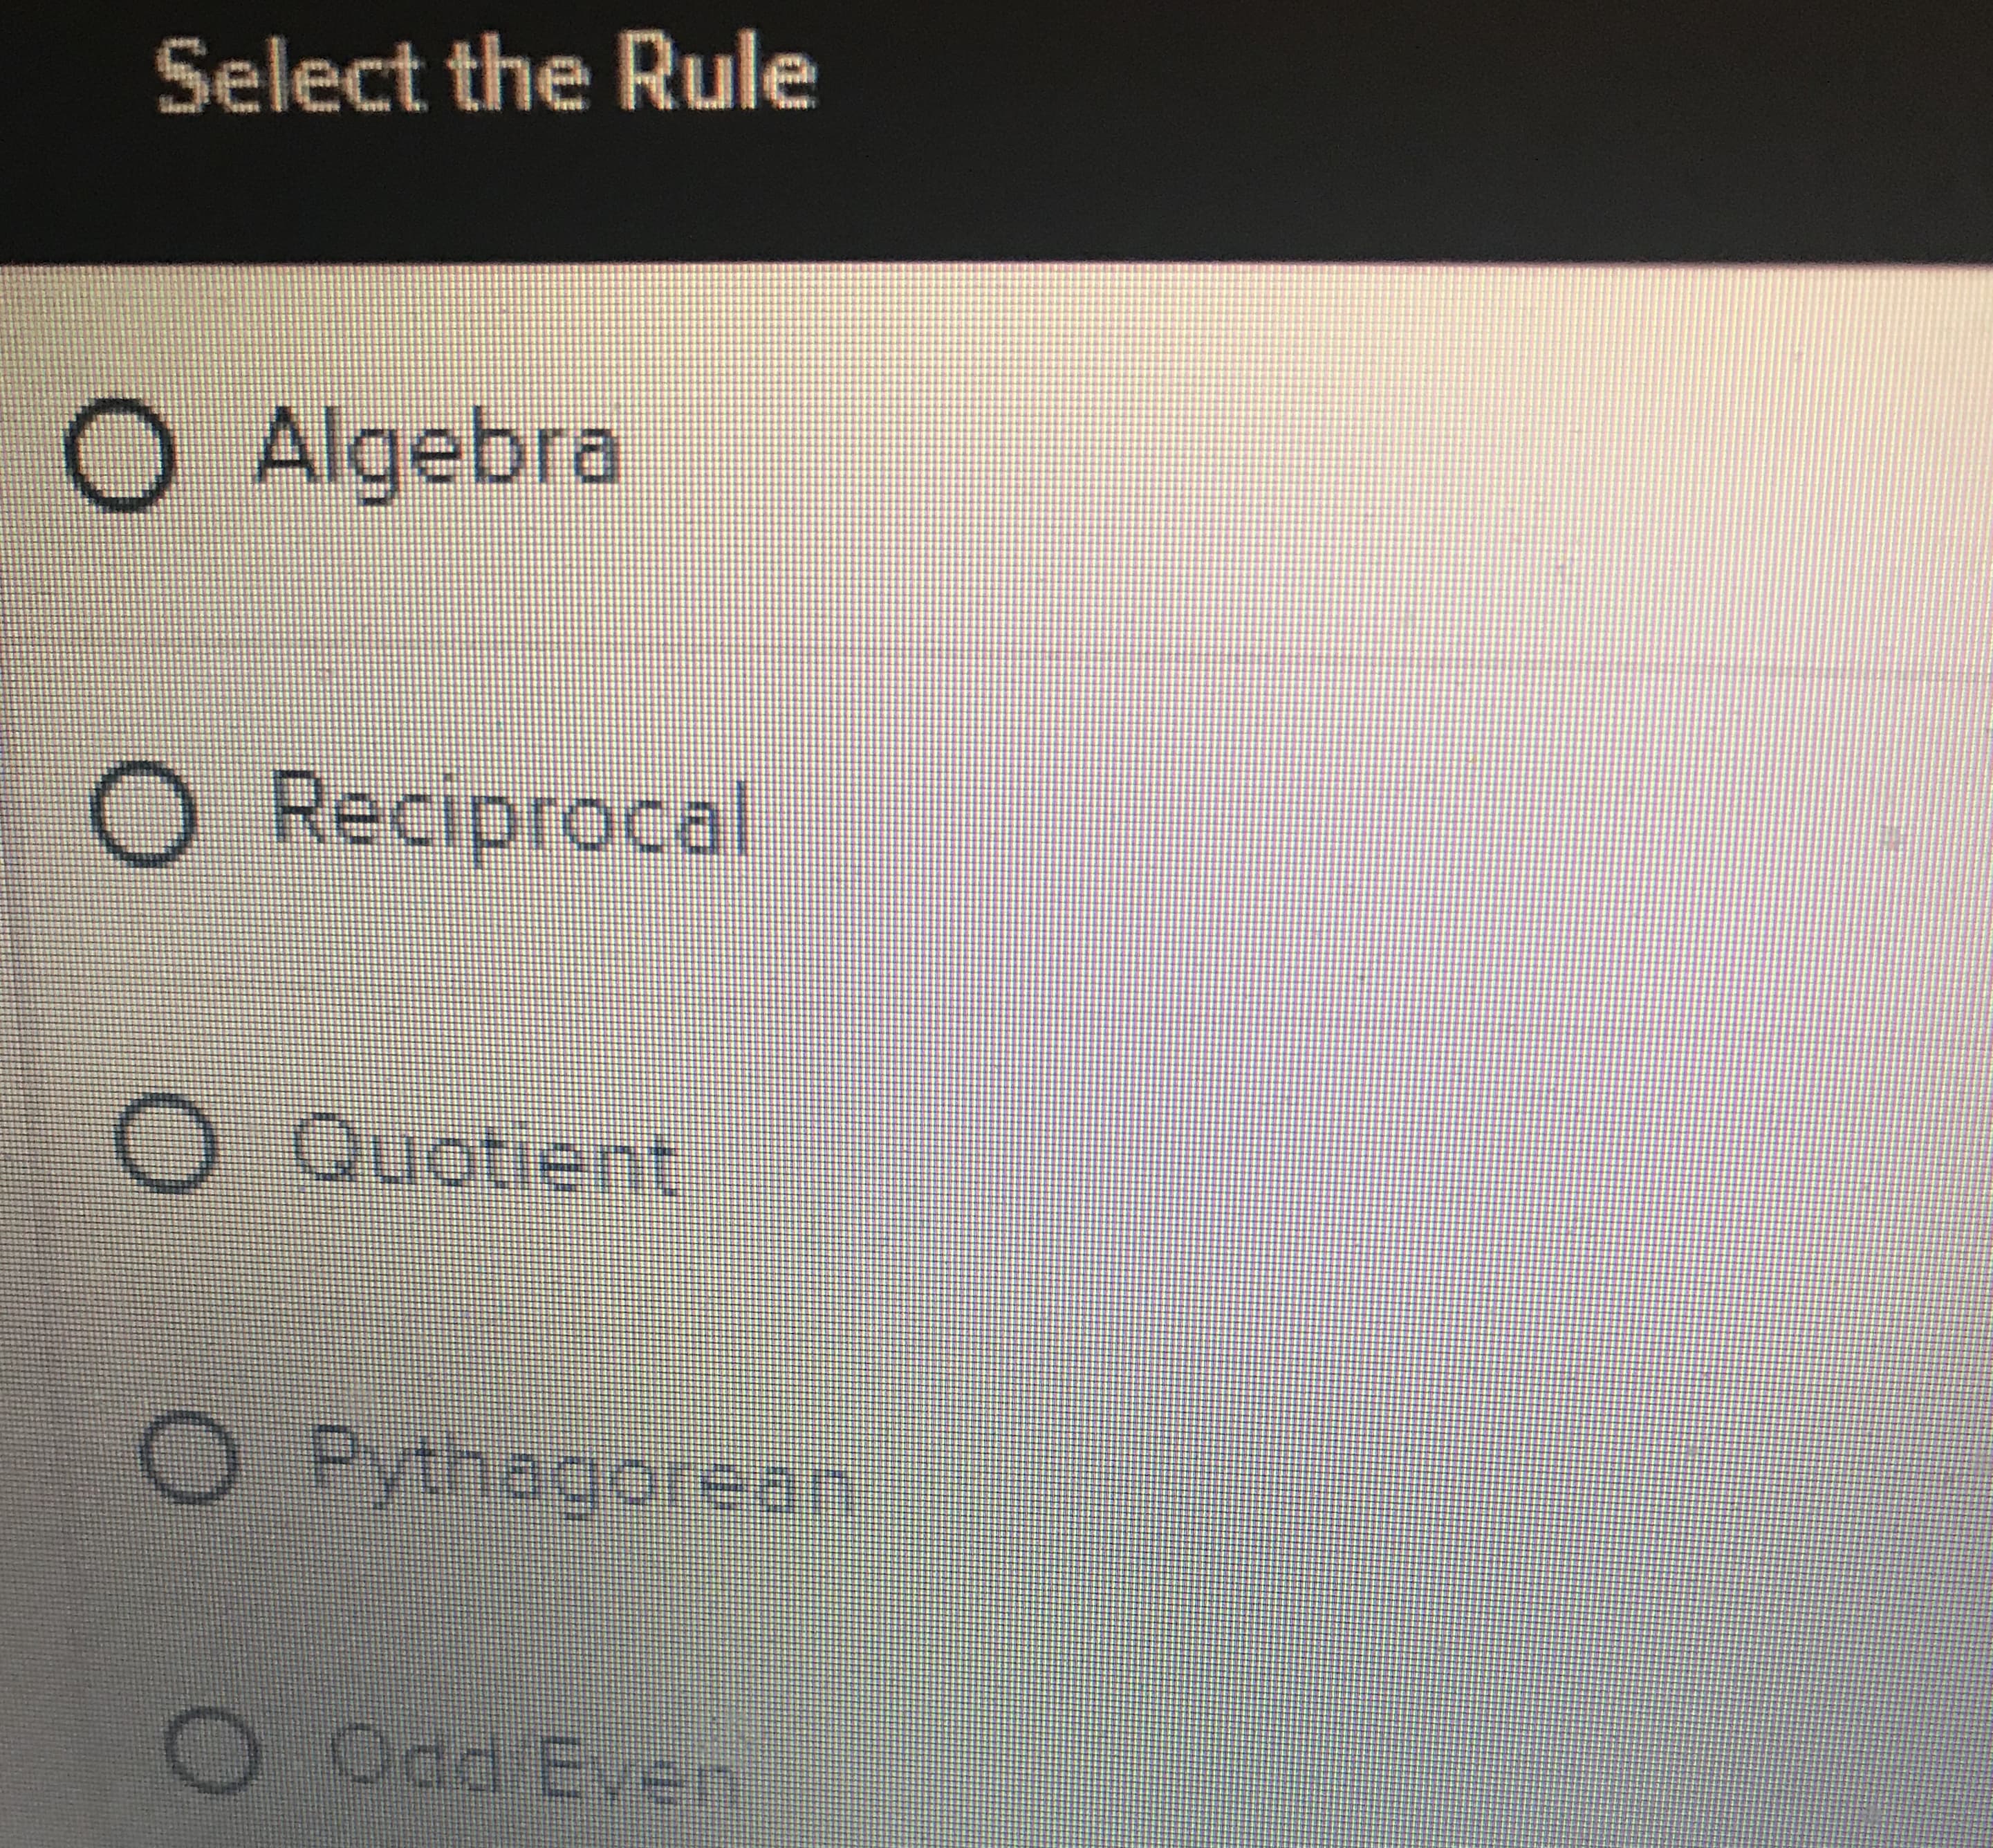 ### Select the Rule

**Please select the mathematical rule you would like to learn more about:**

- **Algebra**
- **Reciprocal**
- **Quotient**
- **Pythagorean**
- **Odd Even**

Simply click on the circle next to the rule to begin exploring detailed explanations and examples.